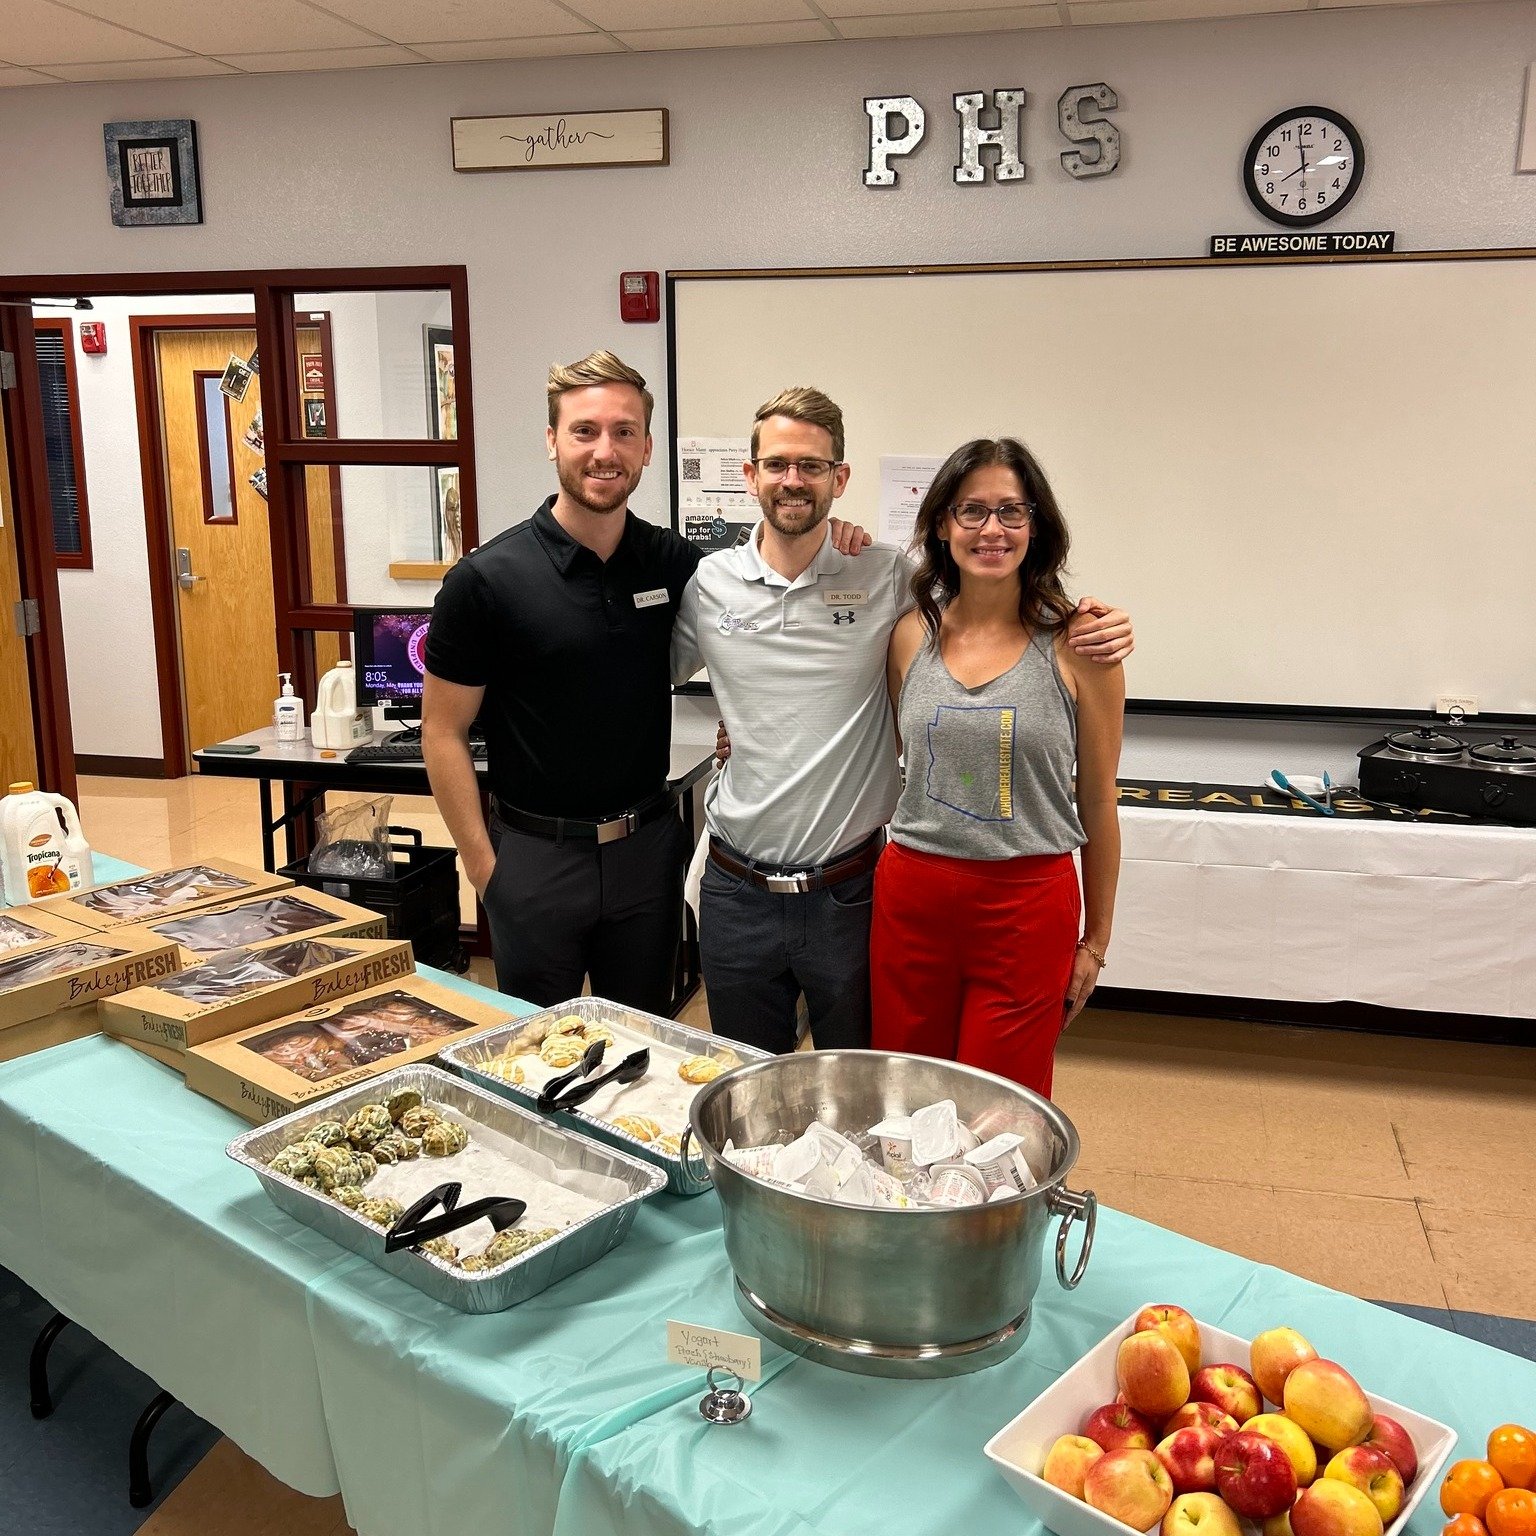 Thank you to Perry High School and Lorana with @azhomerealestate for letting us be a part of their Teacher Appreciation Week! We were able to provide breakfast for some incredible teachers that deserve many more thanks than they receive.

We are gear